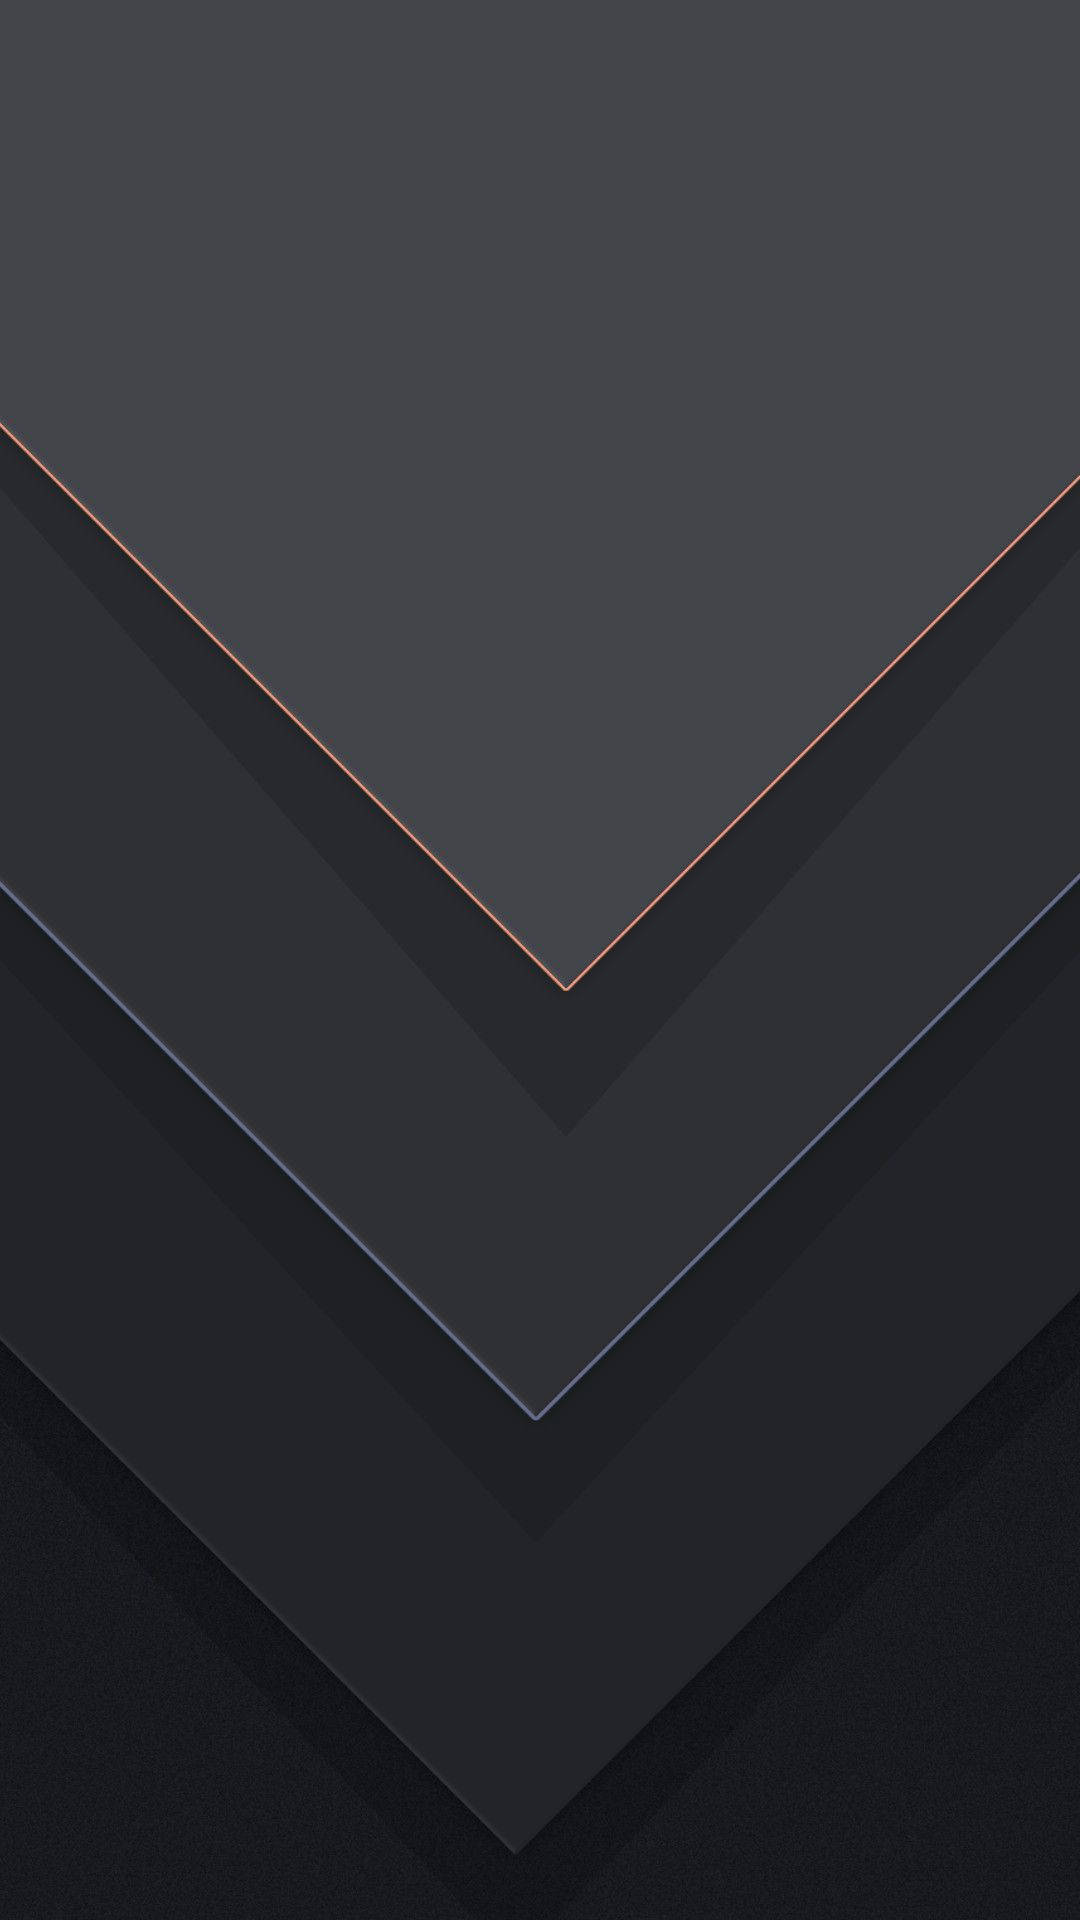 Black Android Inverted Triangles Wallpaper